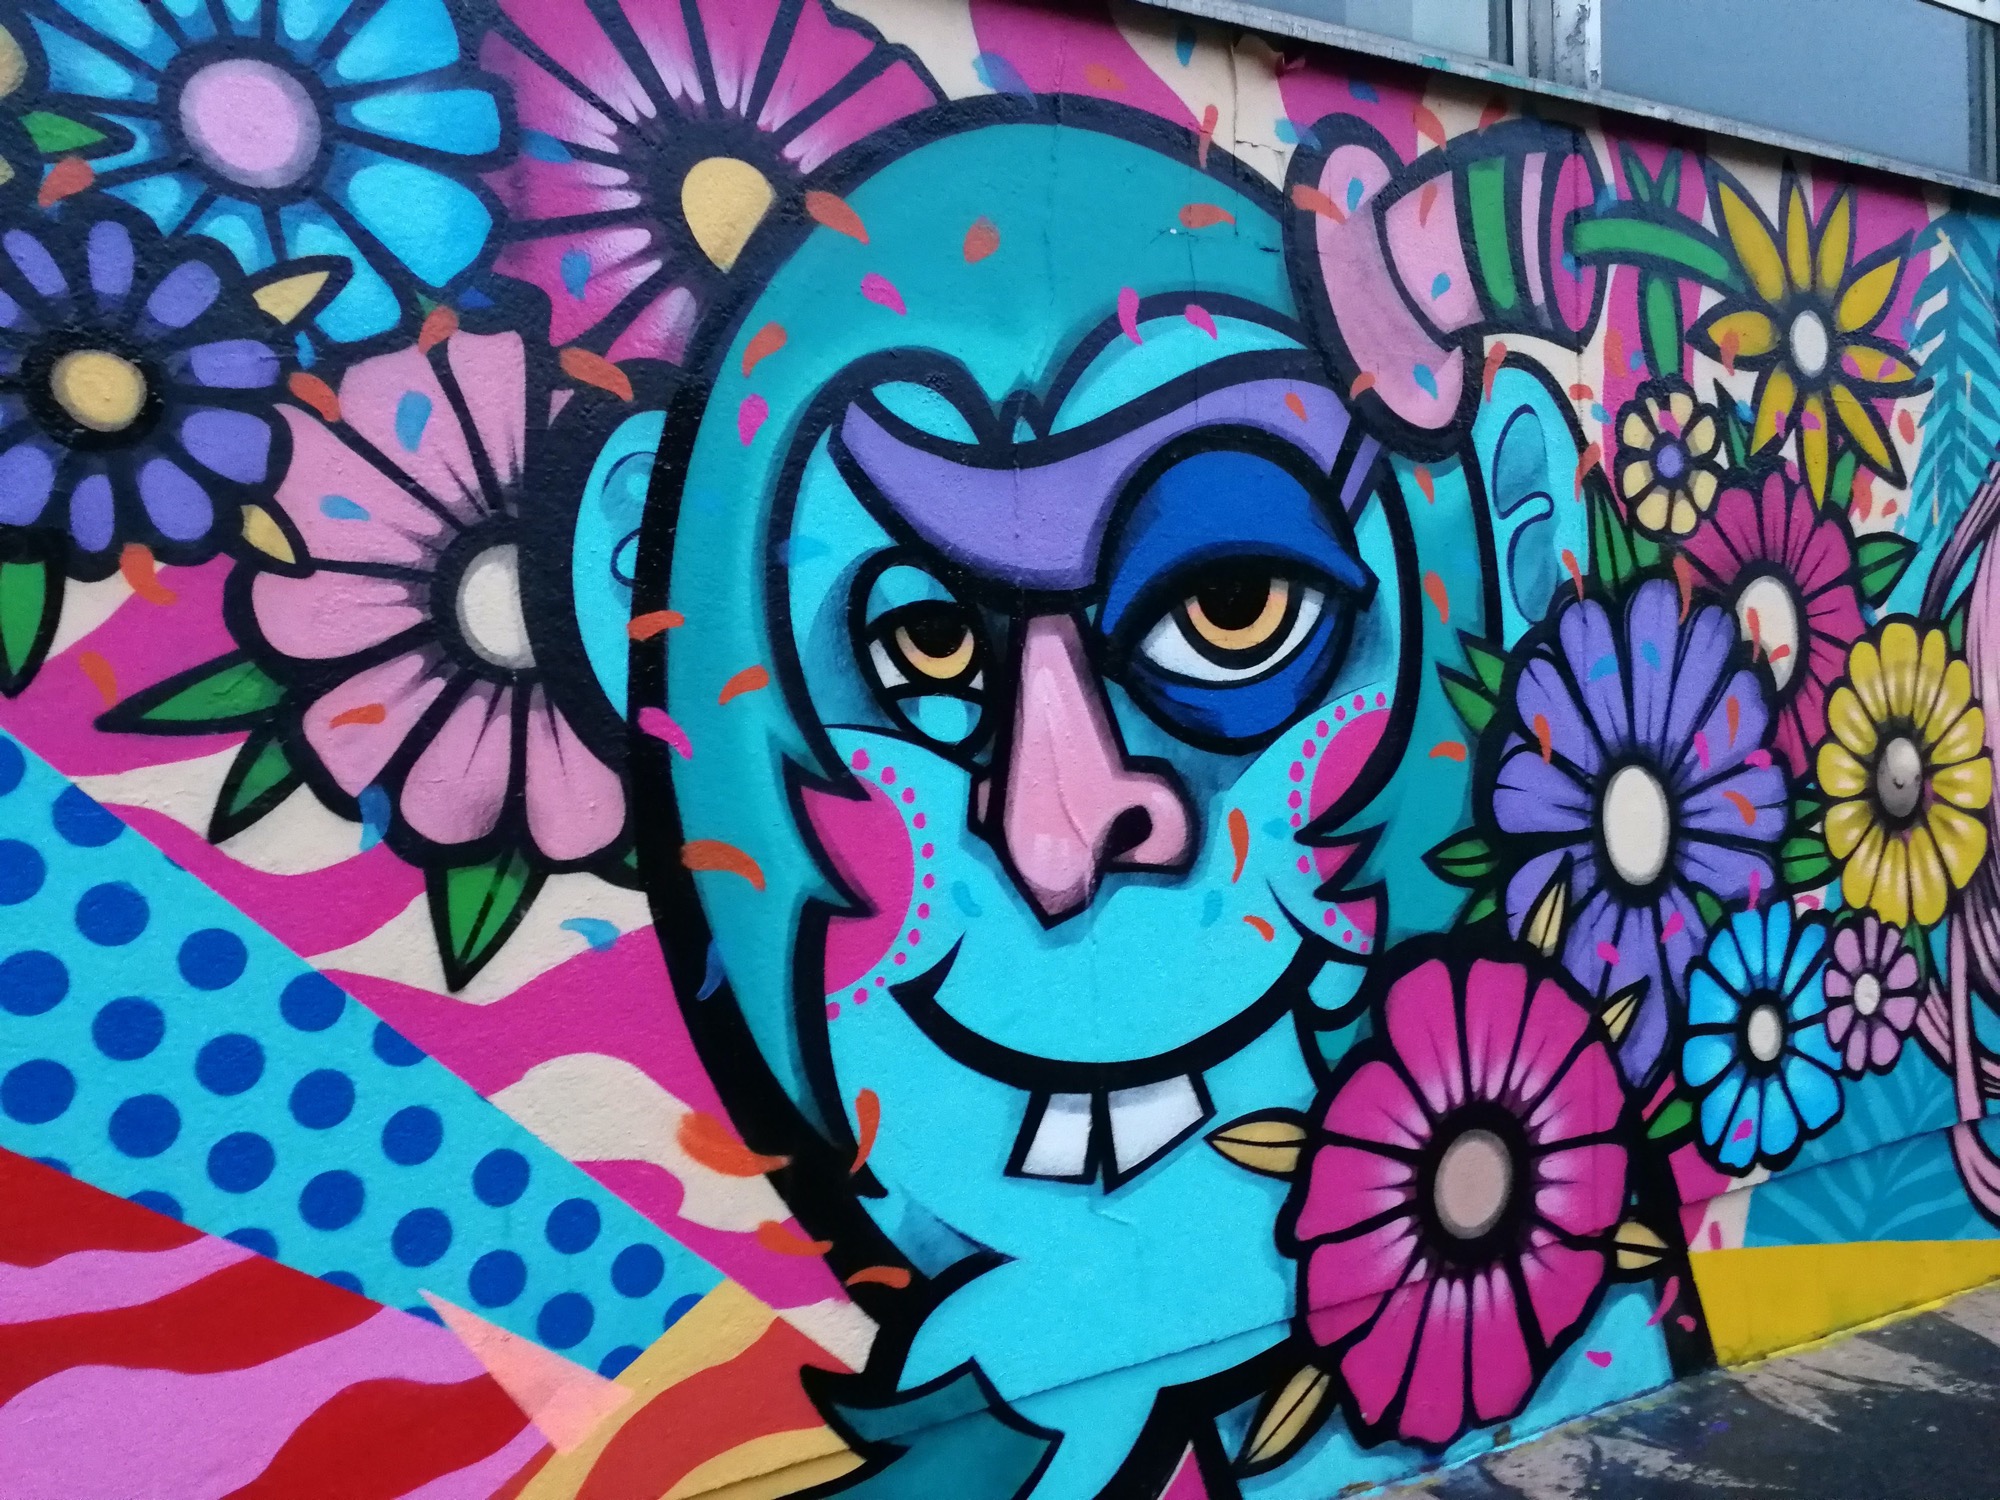 Graffiti 676  by the artist Toys Daniel captured by Rabot in Paris France